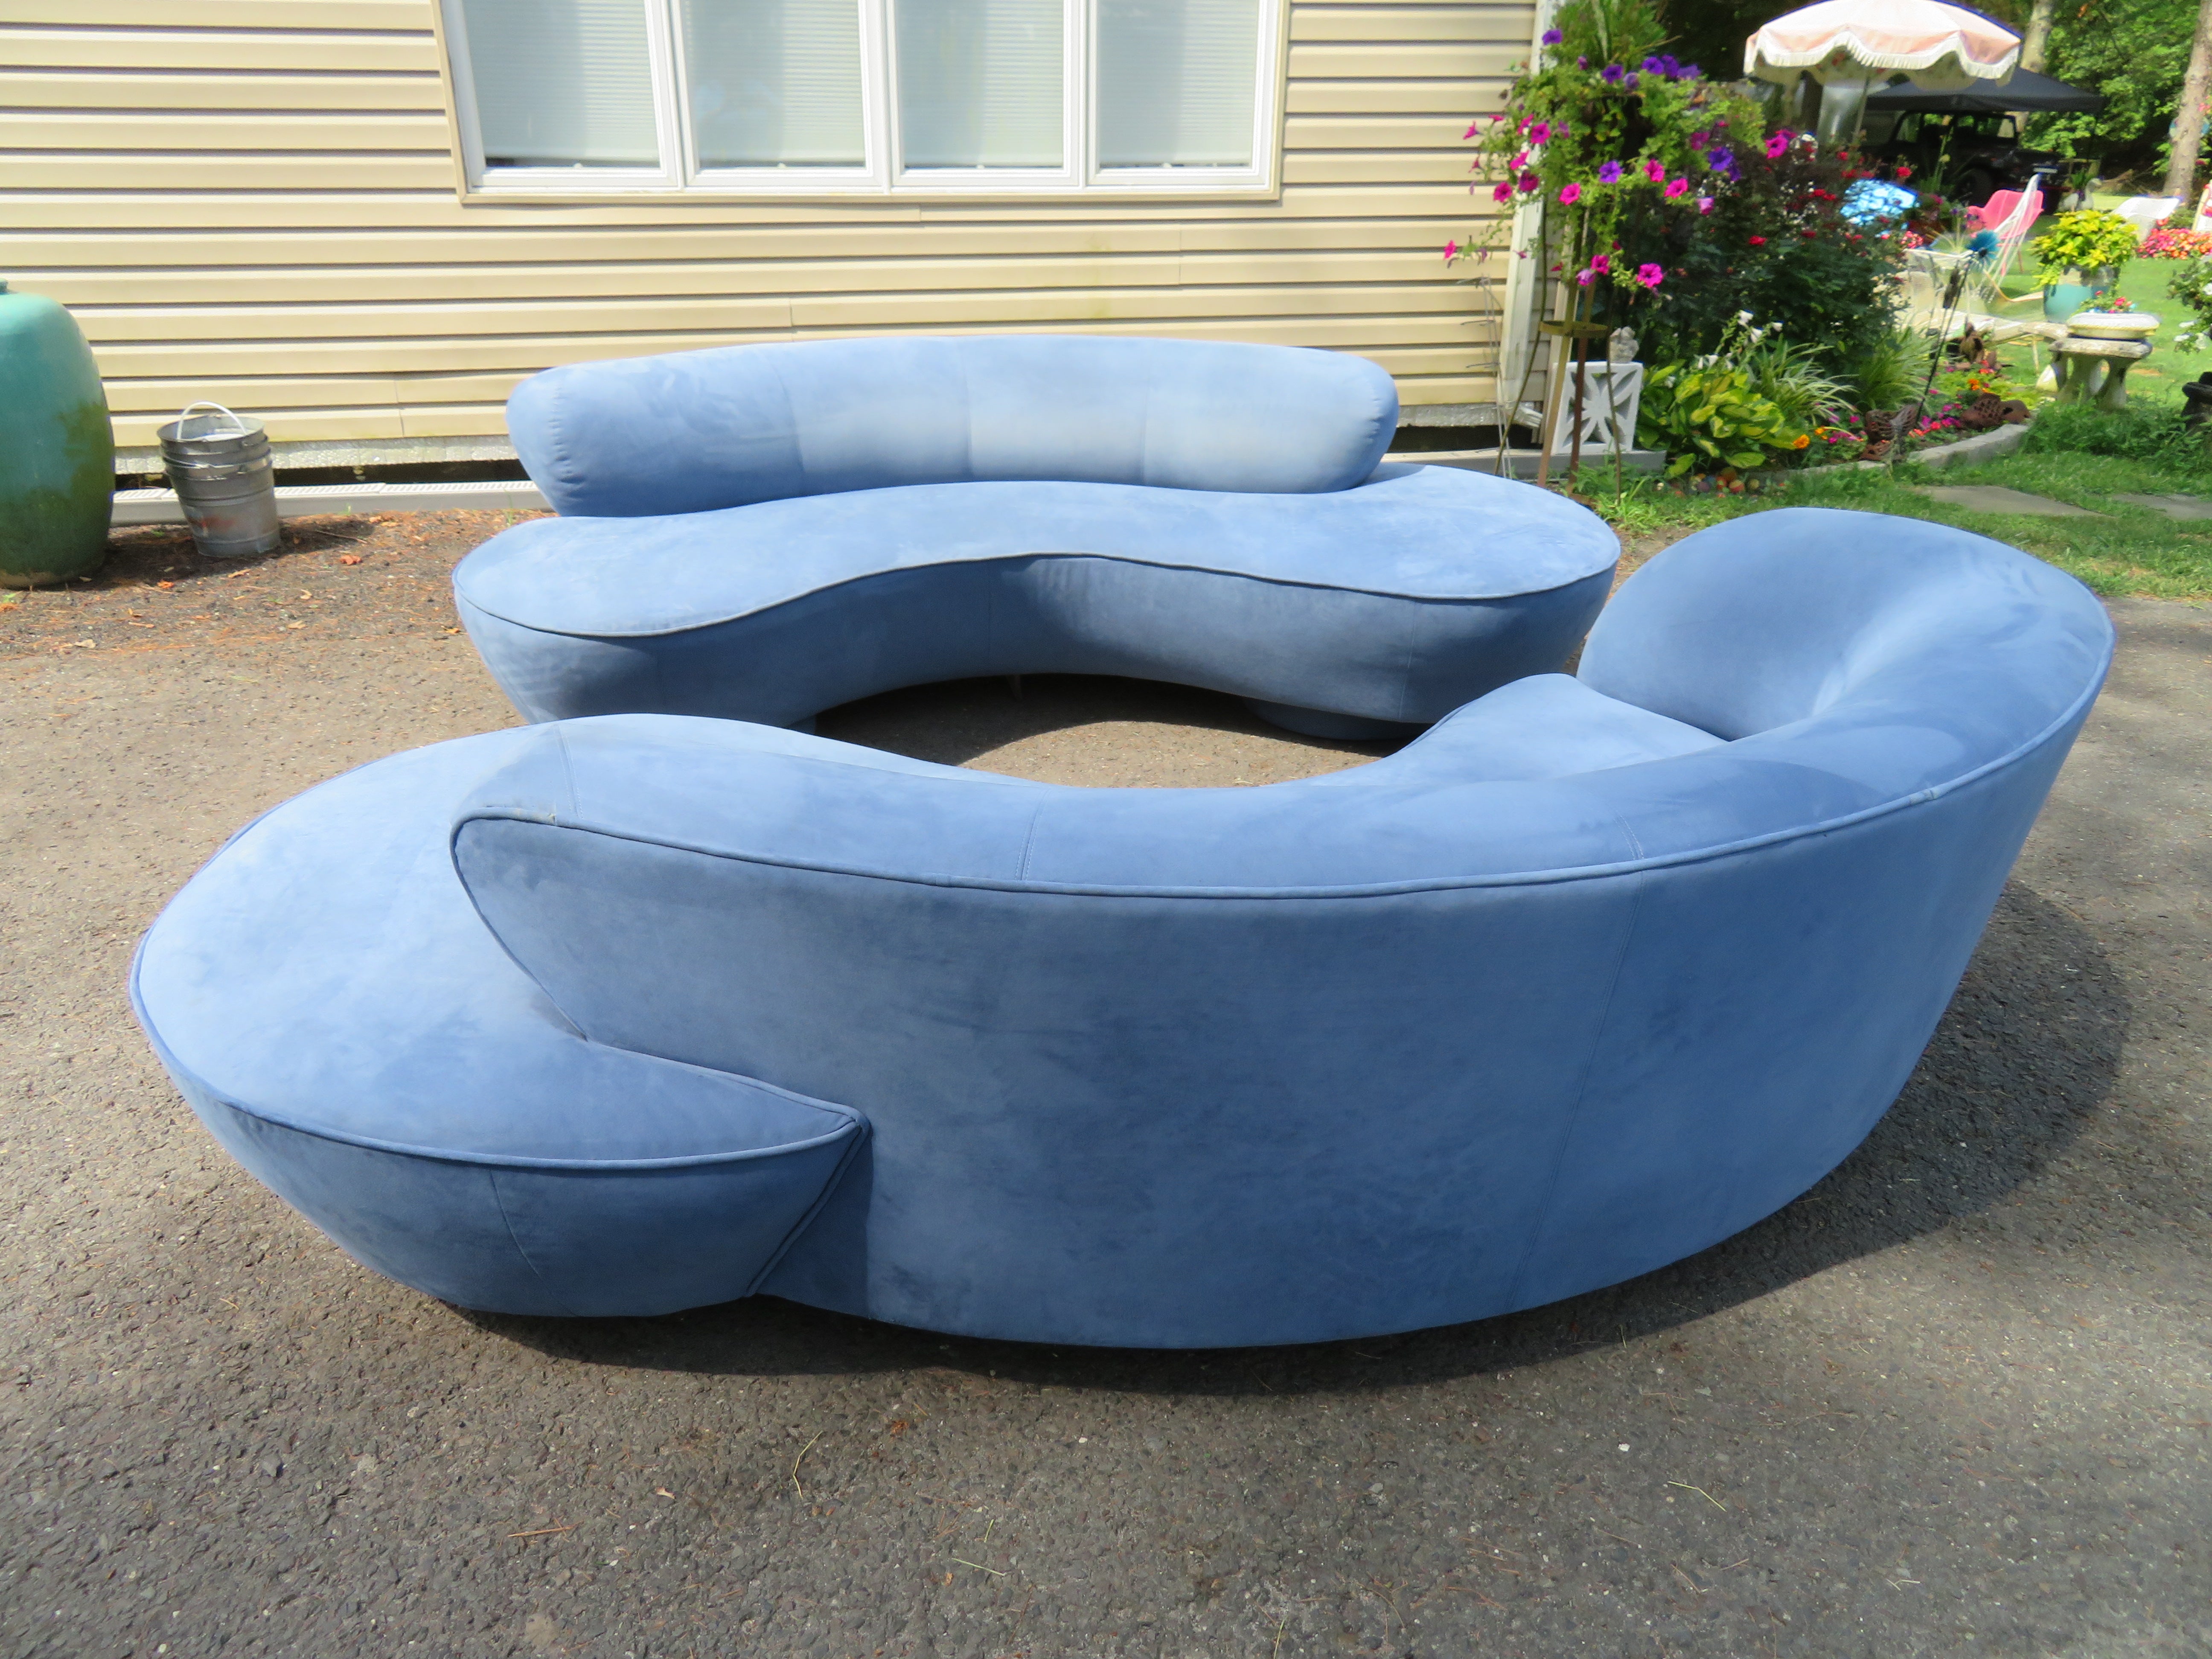 Fabulous pair of Vladimir Kagan cloud serpentine sofas made by Directional. These pair retain their original periwinkle blue ultra-suede fabric in nice vintage condition-some wear spots on a back cushion of one-see photos. Very usable and